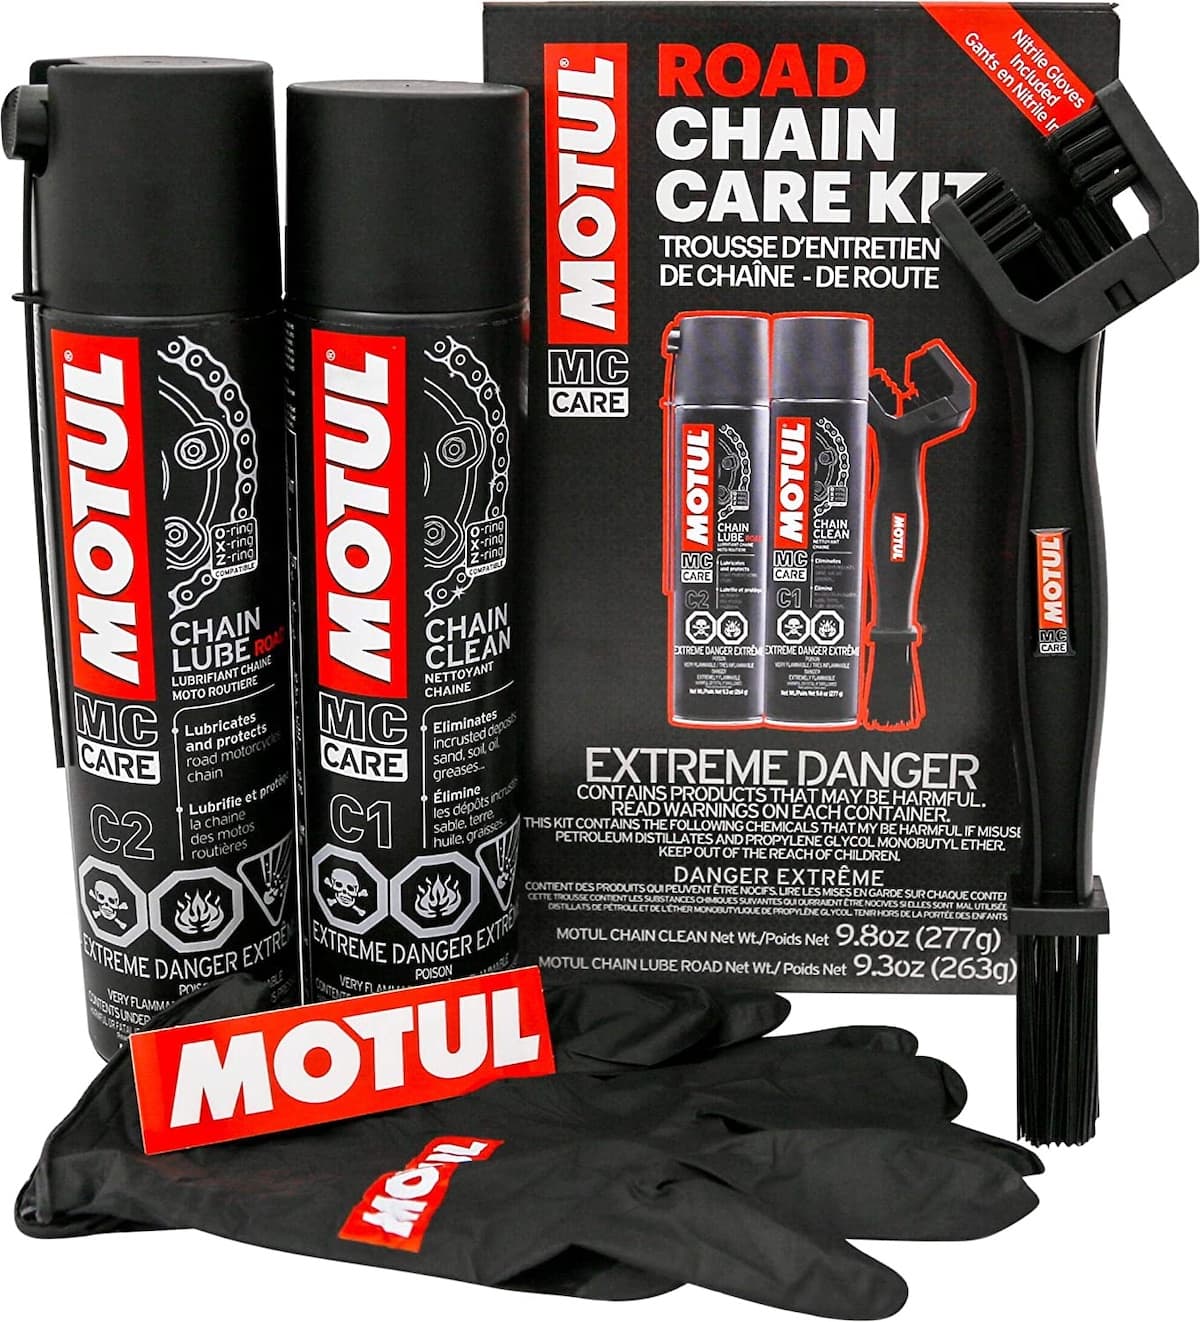 Motorcycle chain care kit for motorcyclemaintenance